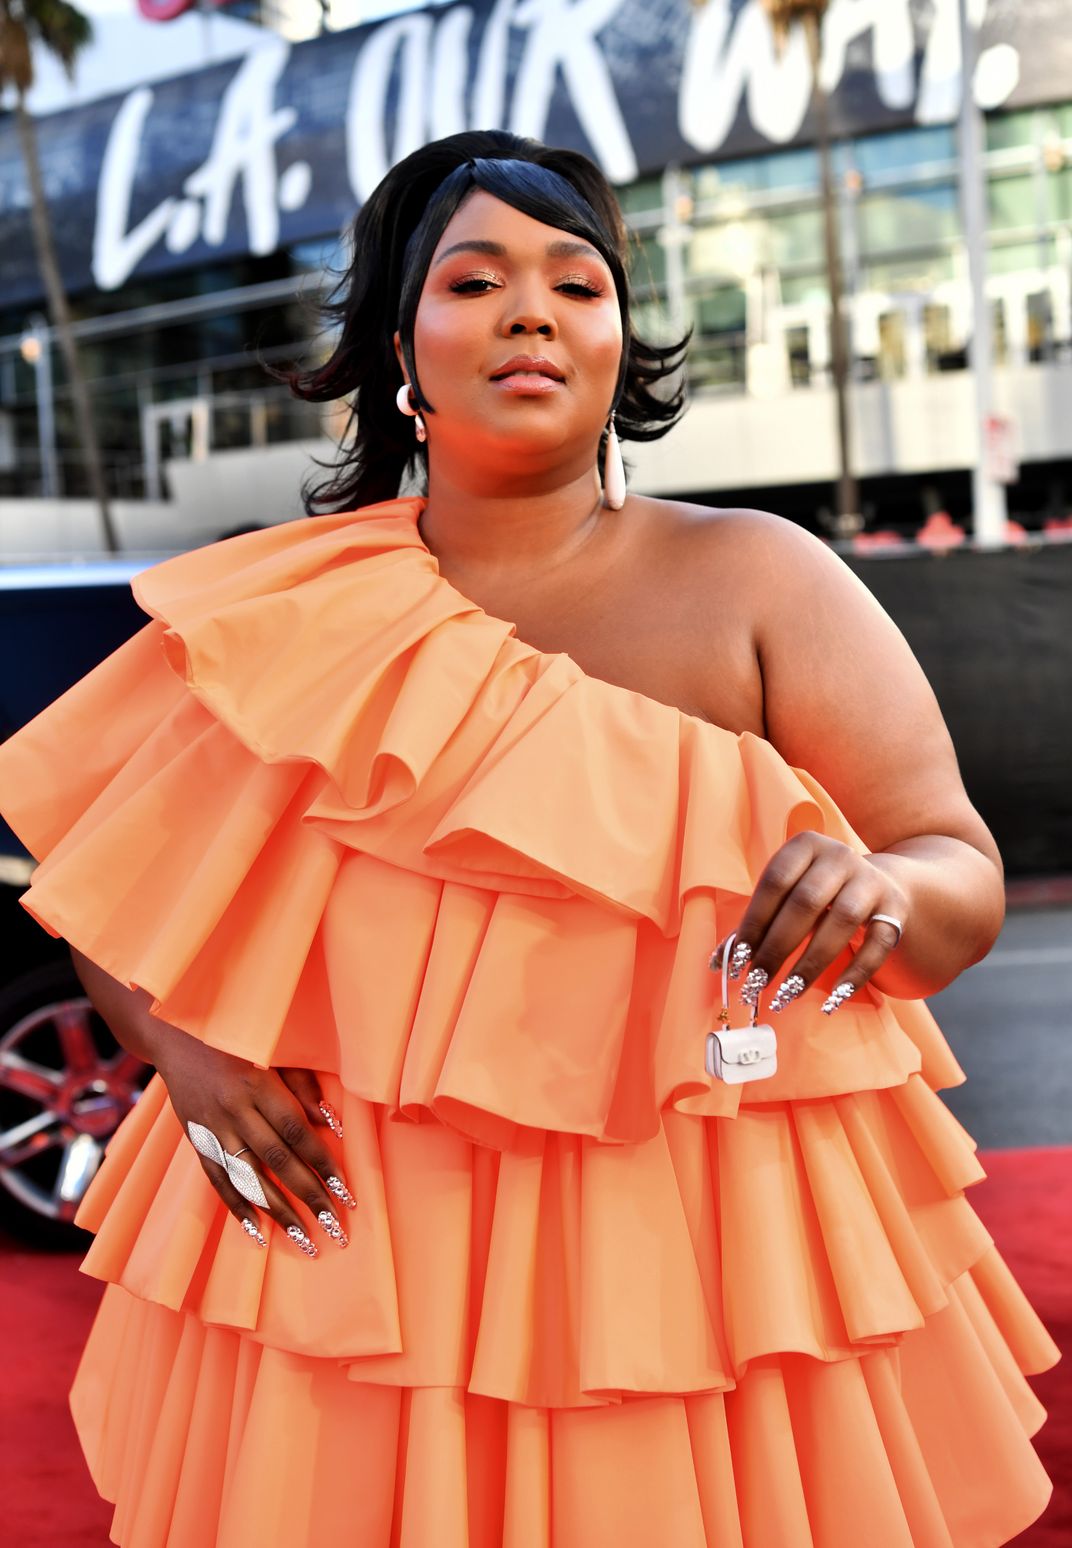 Lizzo wearing an orange dress and holding up a small handbag